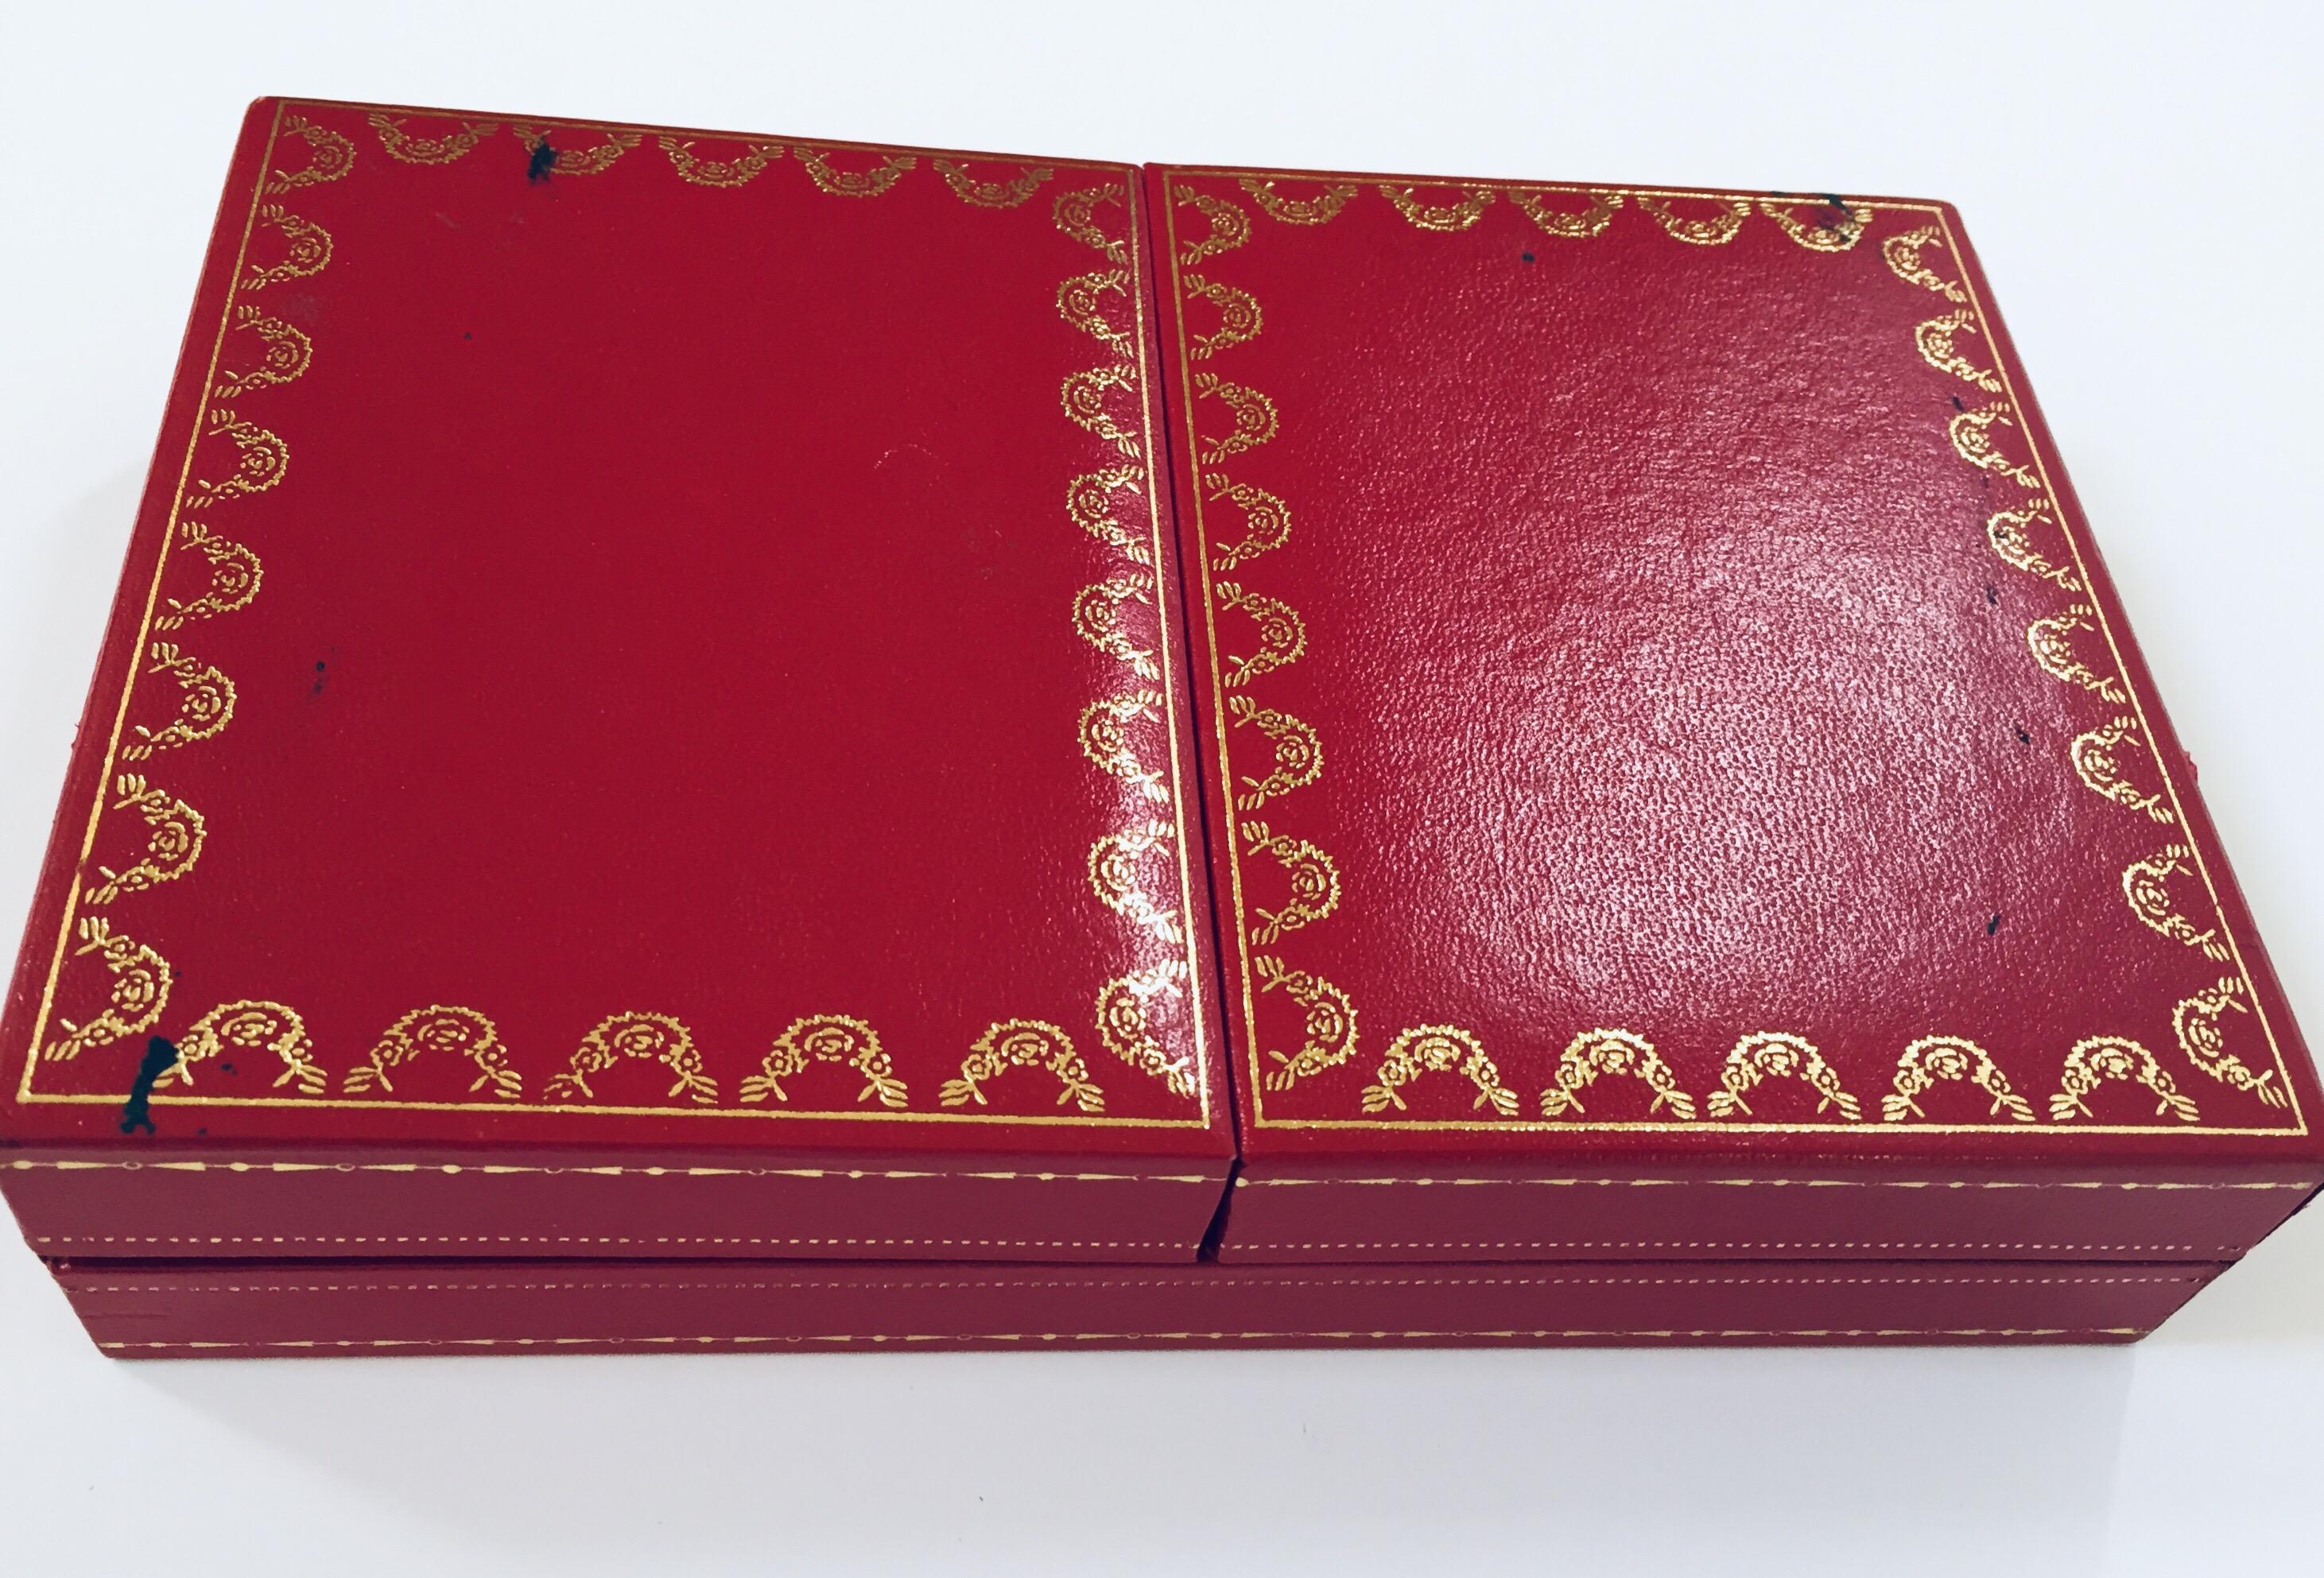 Must de Cartier Paris Vintage Playing Poker or Bridge Cards in Red Box 4